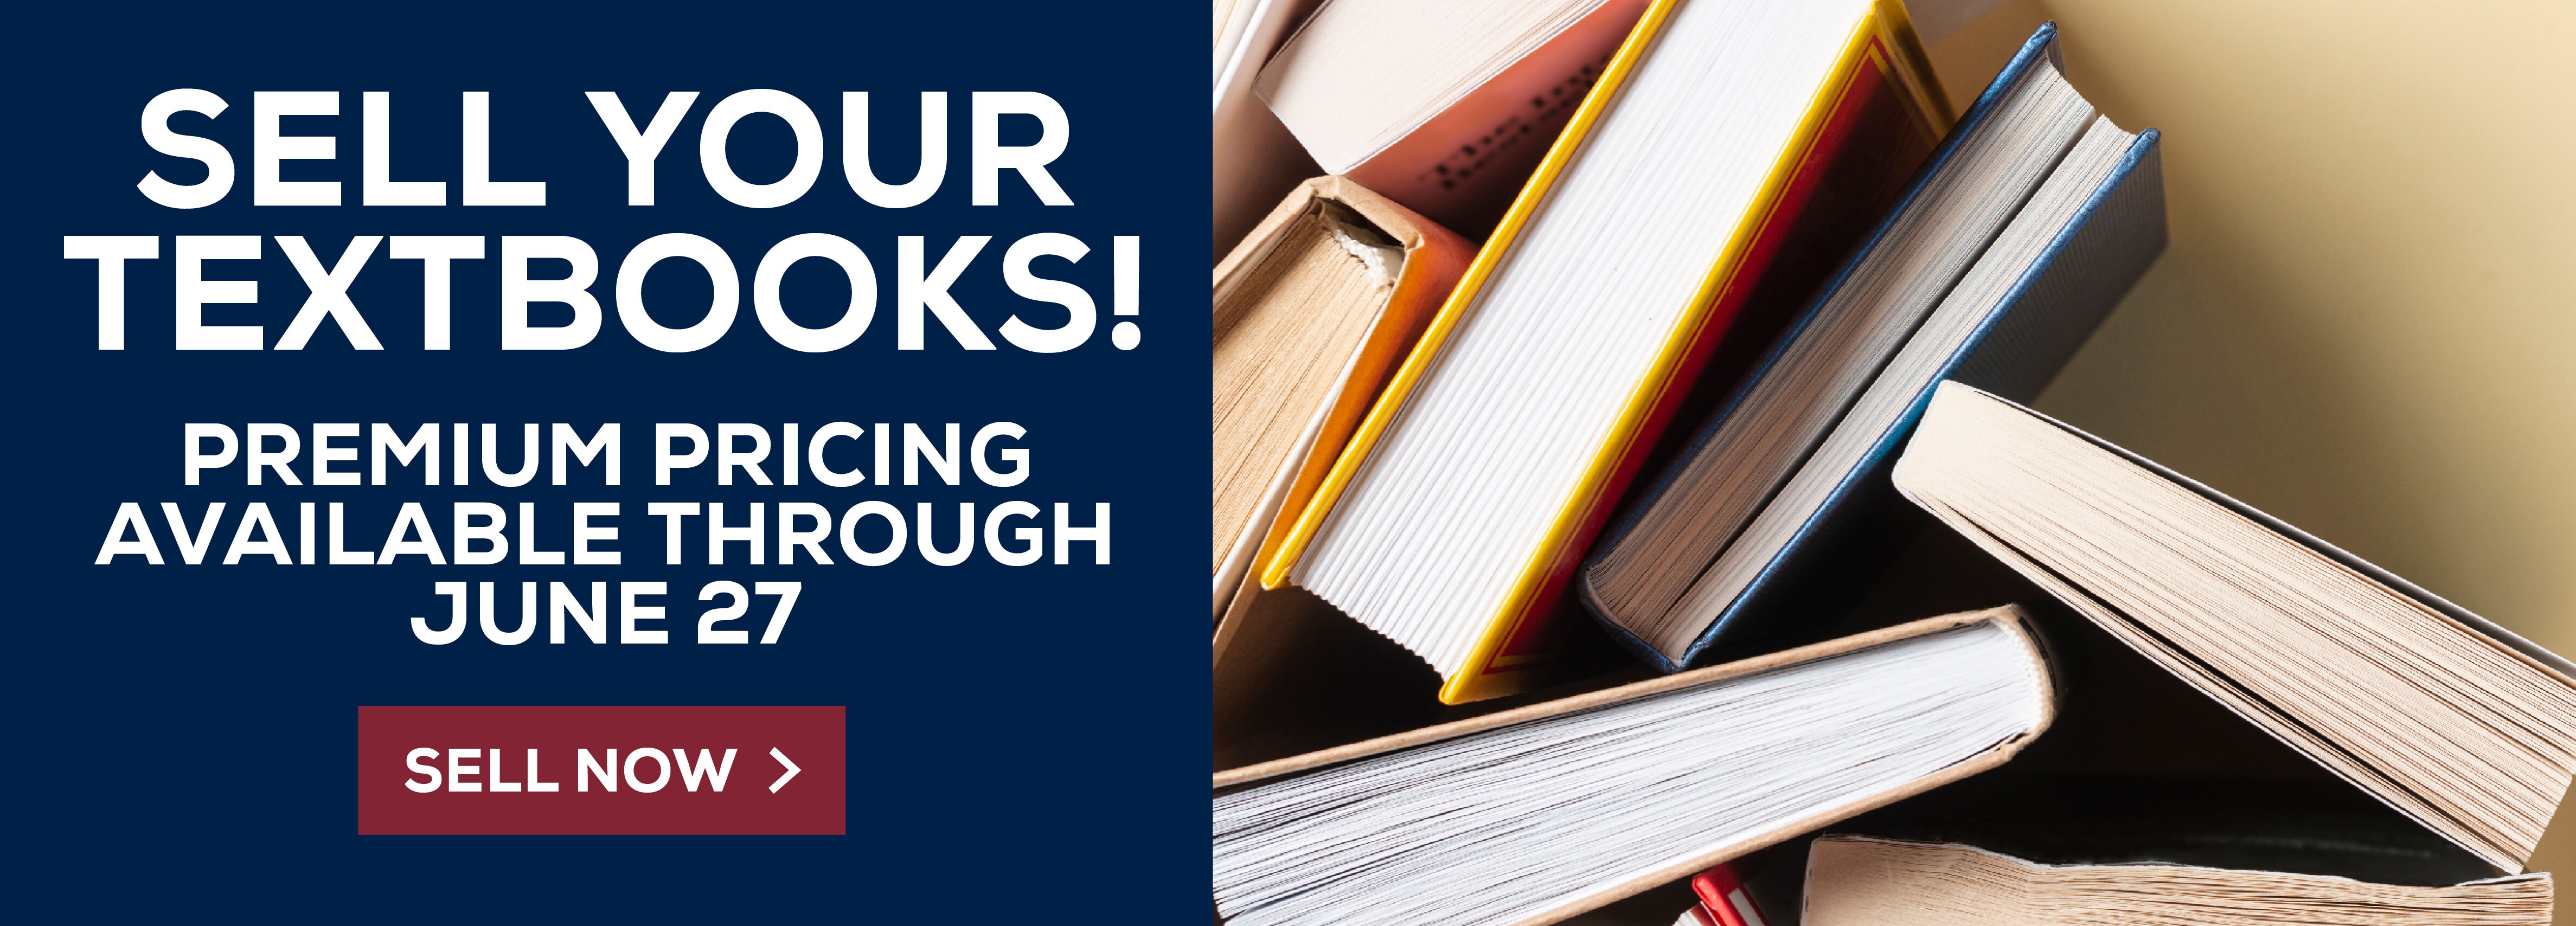 Sell Your Textbooks! Premium pricing available through June 27. Sell Now!					